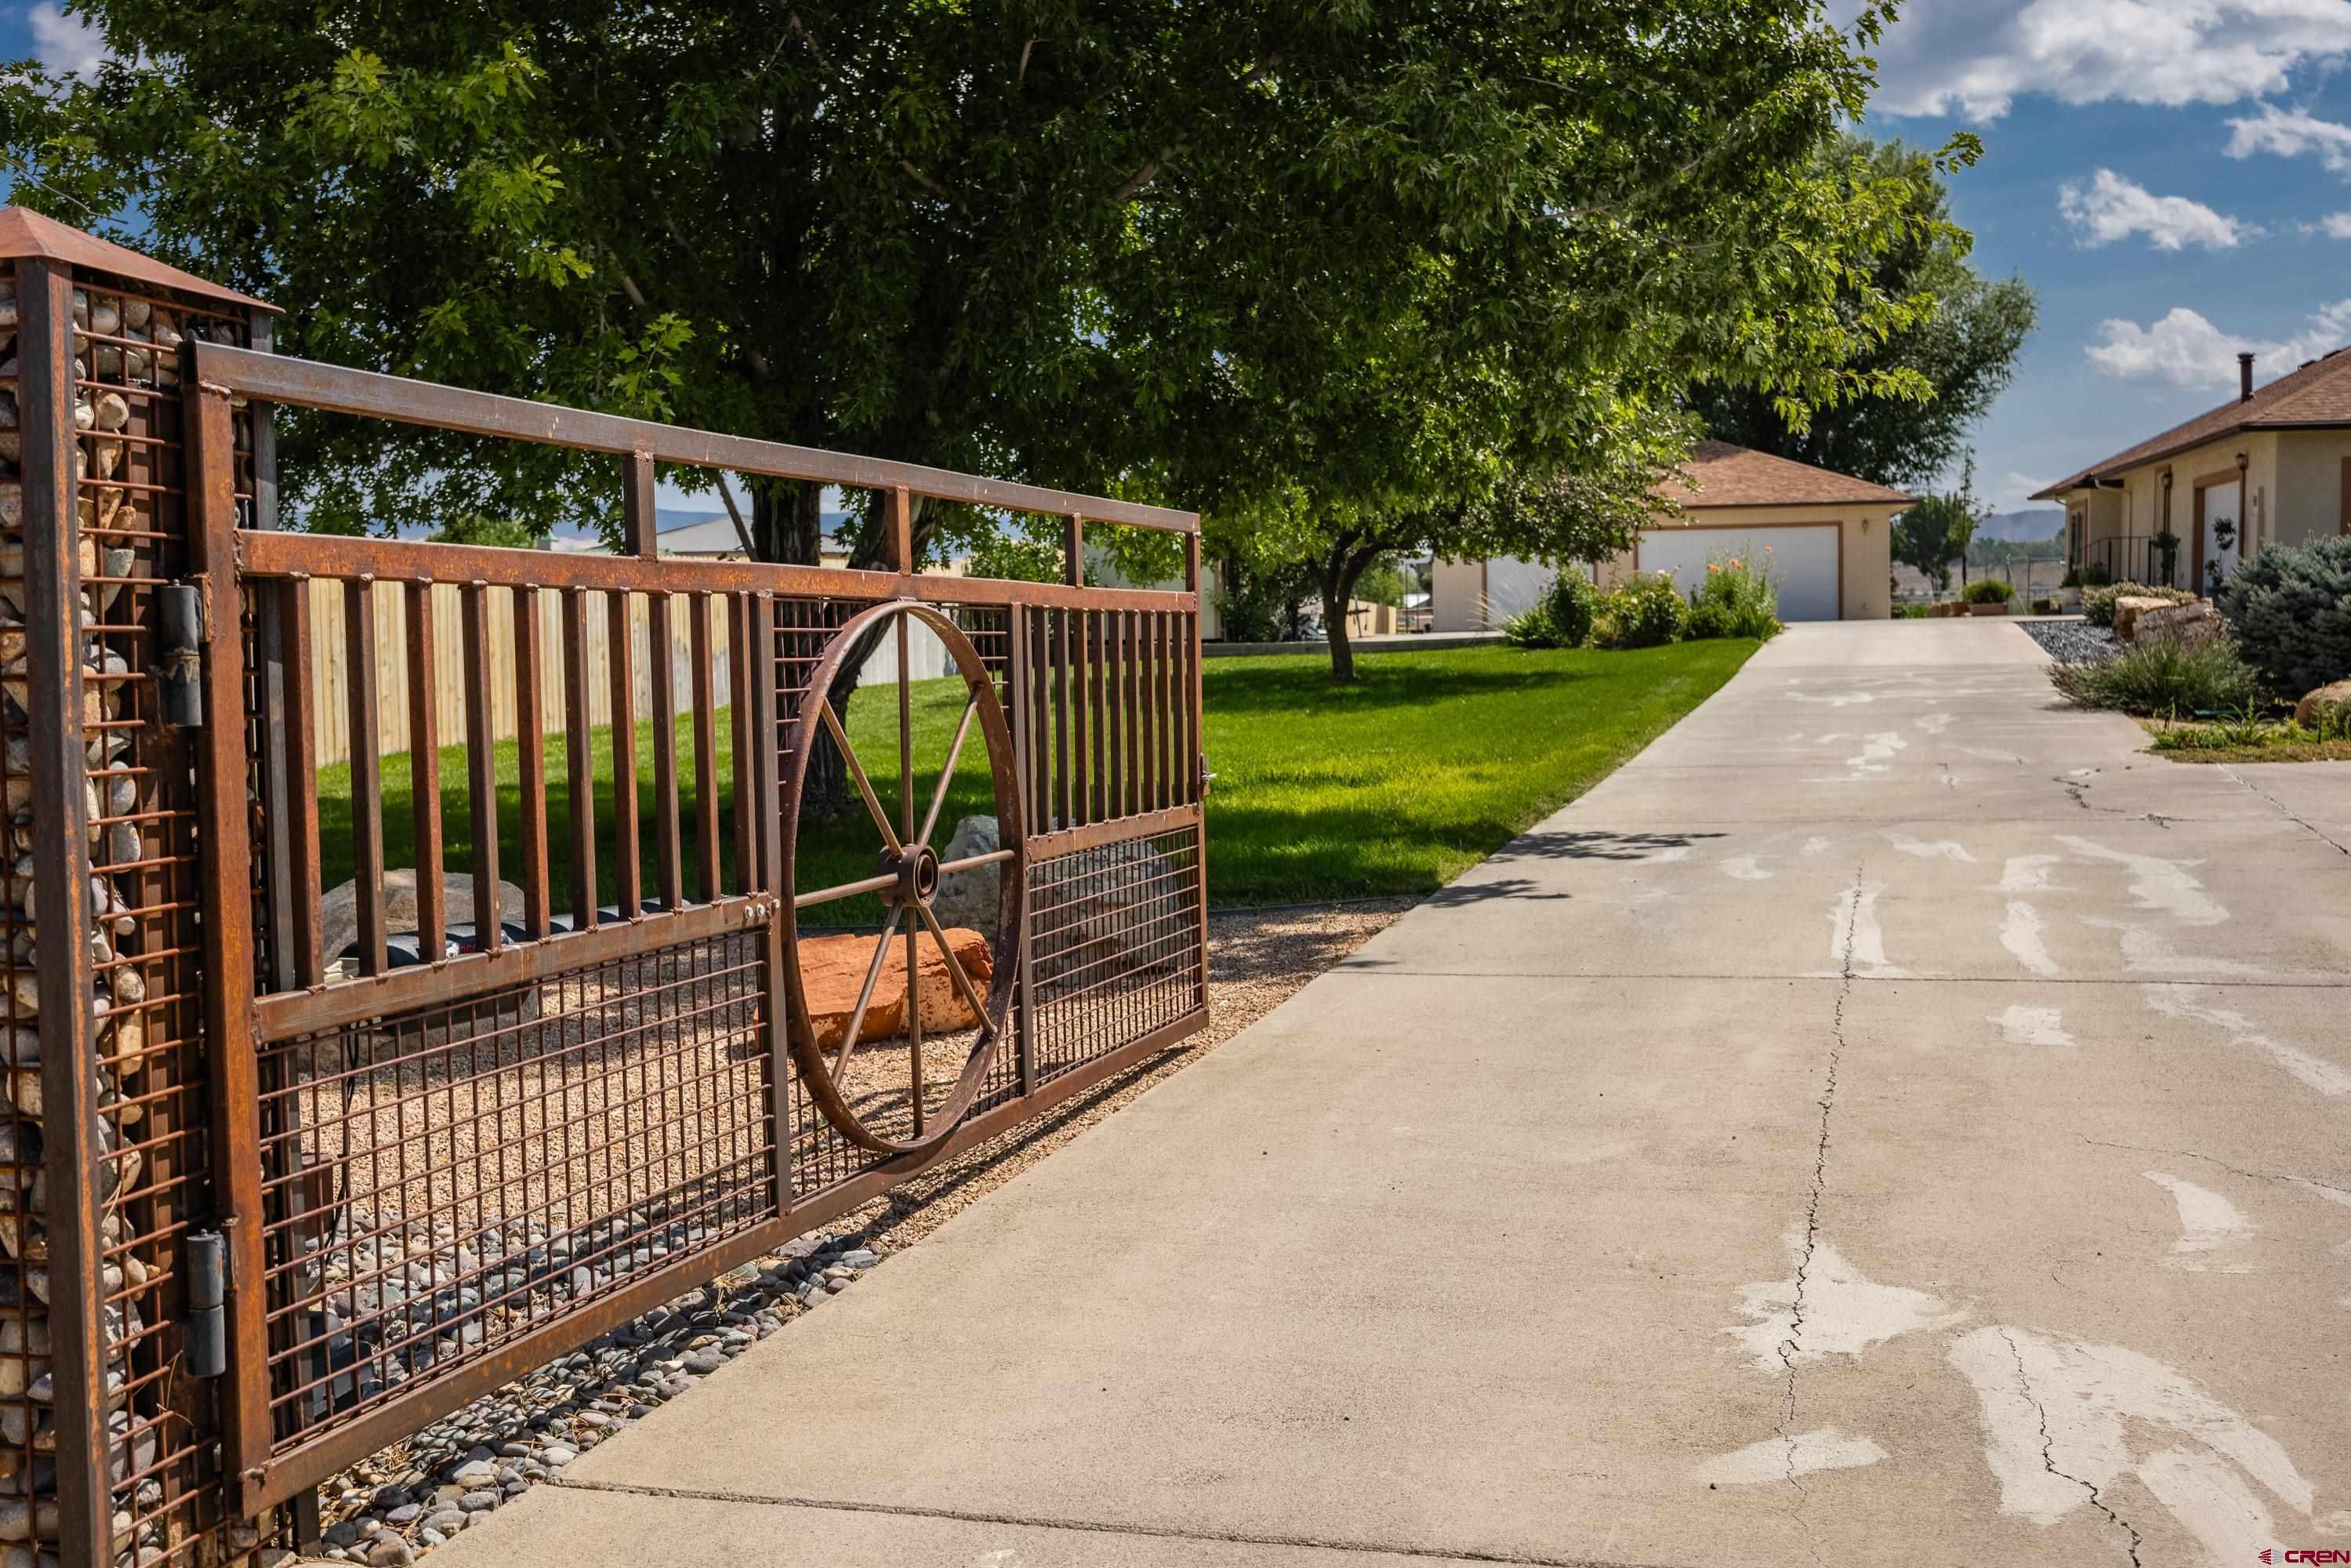 The electric privacy gate greets you to this 2.1 acre Mini Estate in Montrose Colorado.This property checks many of the boxes for todays buyers . Single attached garage and a 3 car heated detached garage/shop, RV setup with dump station and hook up, 2 acres with irrigation system for the park like landscaping around the home so that you can enjoy the great outdoors. Another acre with fruit trees, retention pond, Chicken coop / storage shed and room for critters.  The circular driveway gives company plenty of off street parking for get togethers. Then you enter the completely remodeled home with new oak hardwood floors, brand new dream kitchen that you have to see to believe. Much of the lighting is new.  Custom built-in cabinets , trim and interior paint leaves nothing for you to do but move in. No amount of words can describe all the details that have been done to this home. Great location only a few minutes to dining, golf, and shopping . Seeing is believing .